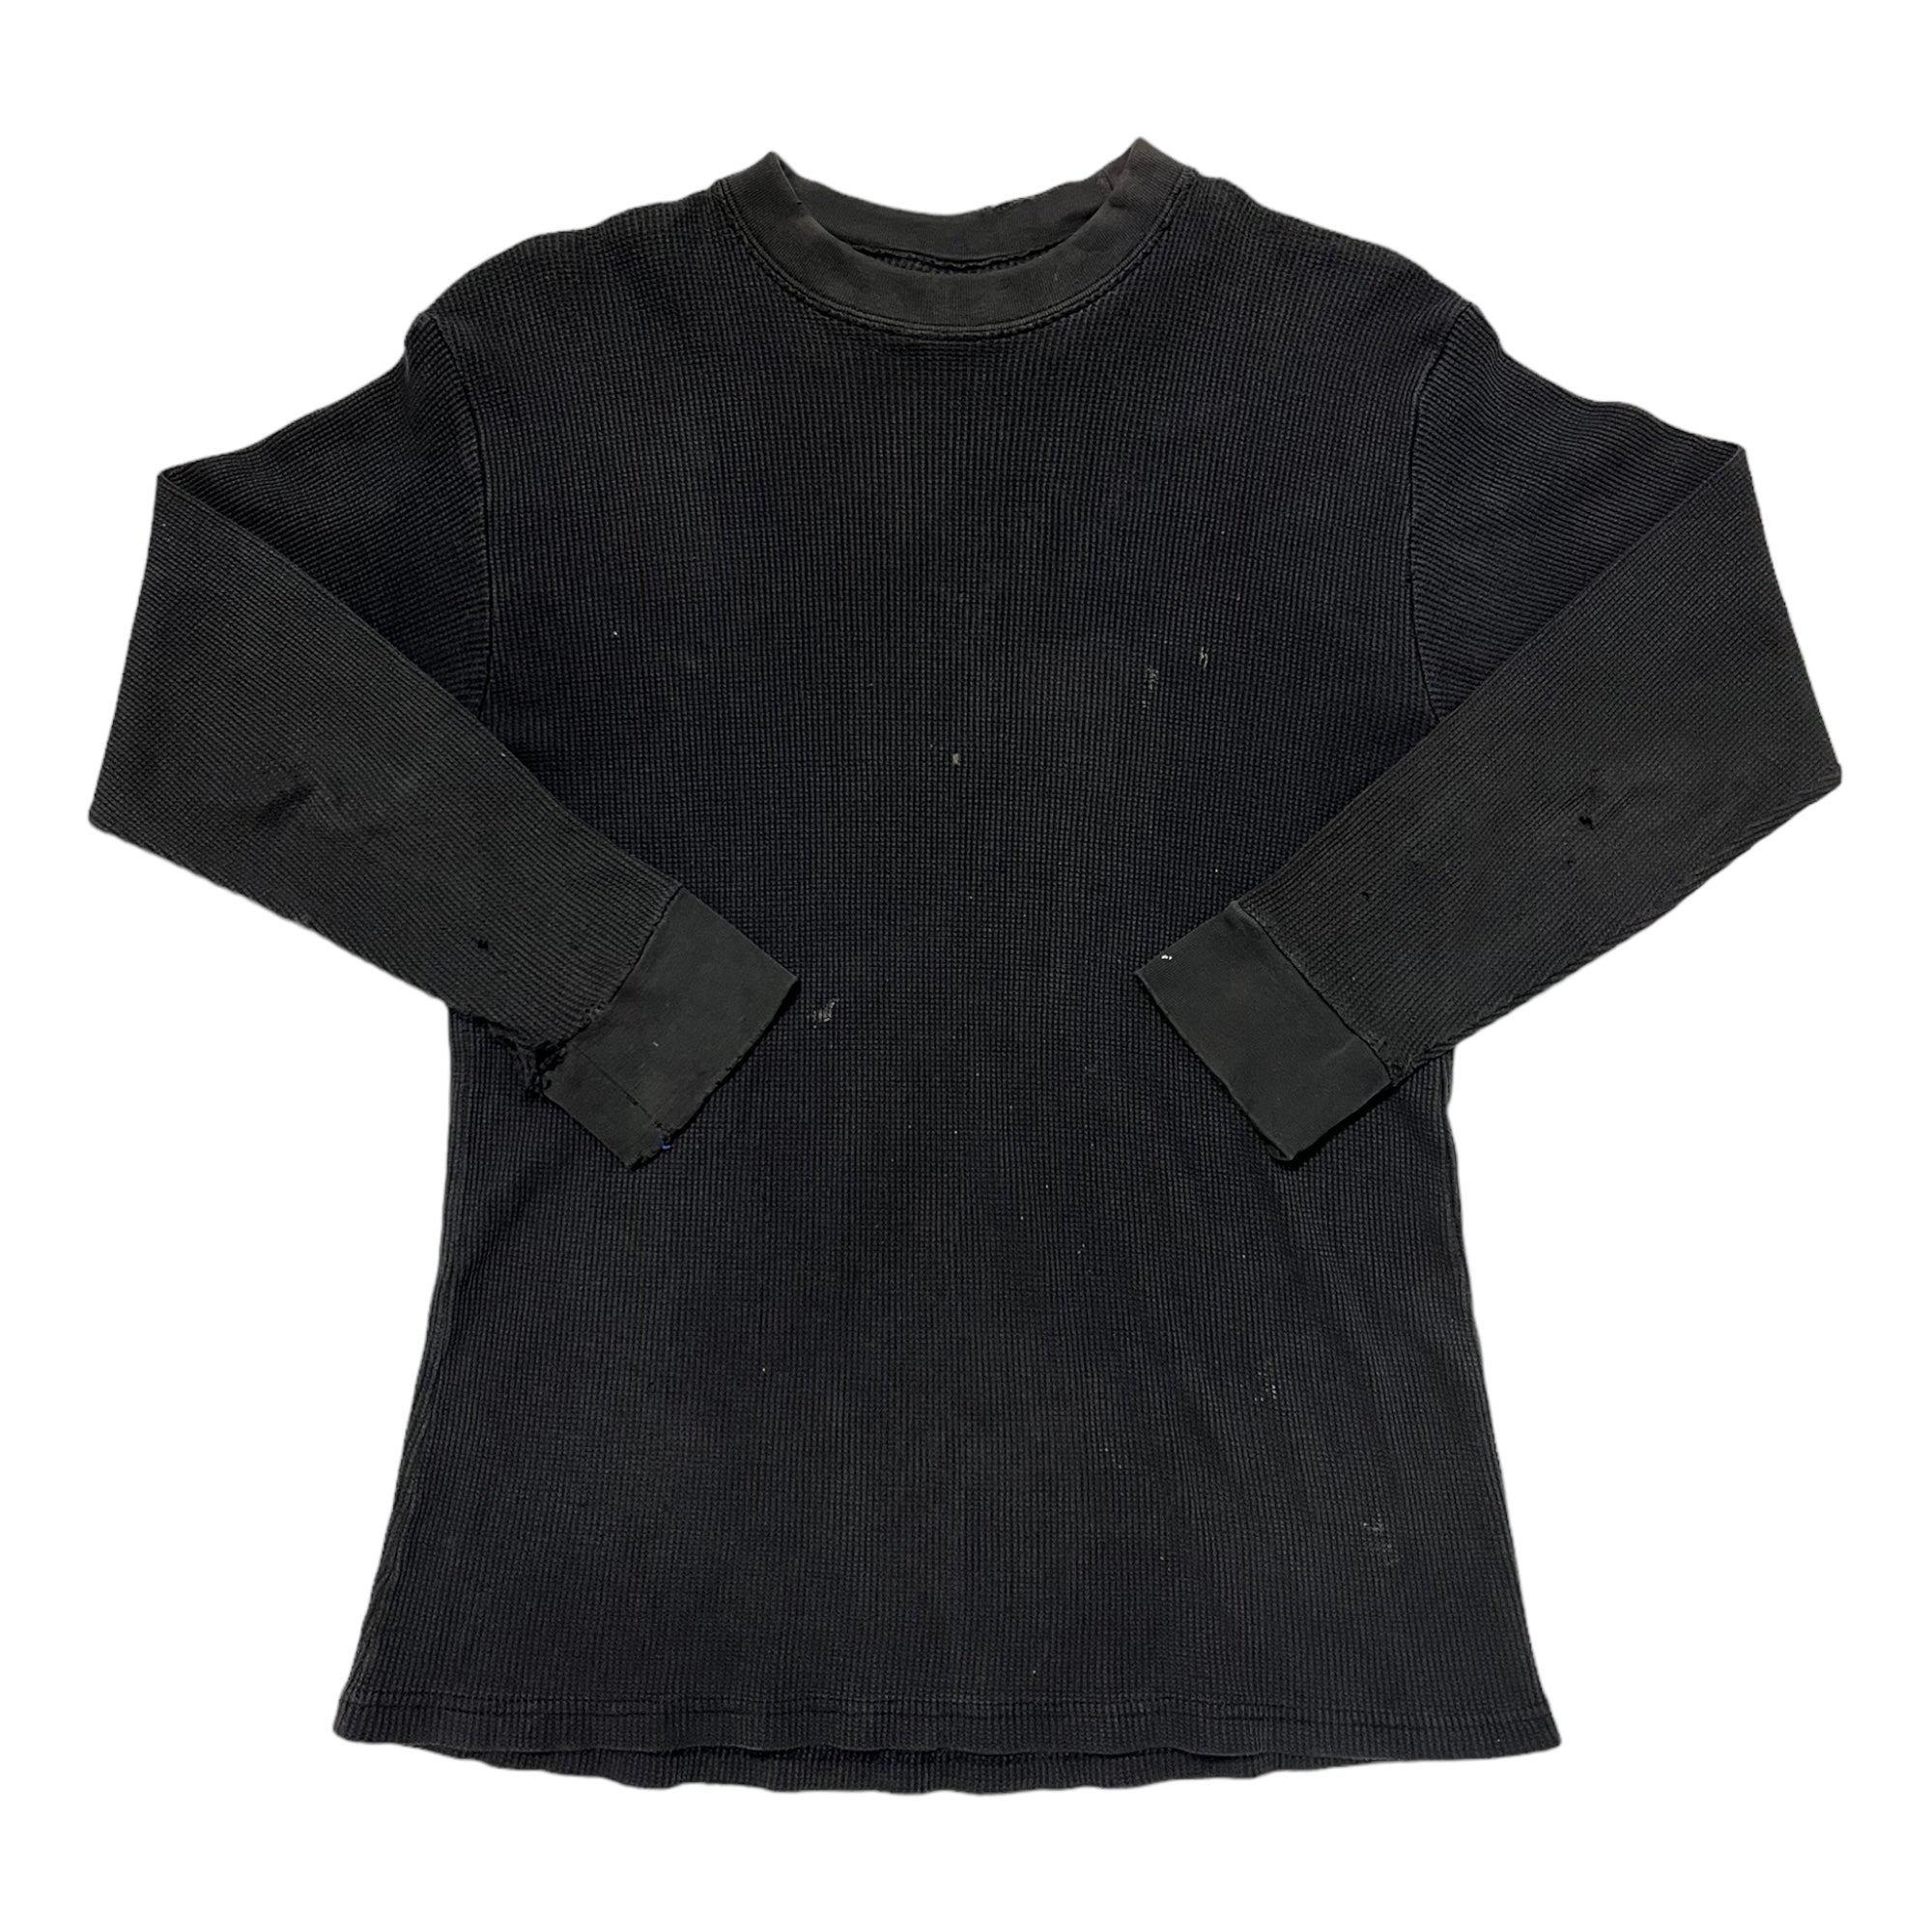 1990s Distressed & Repaired ‘Made in USA’ Thermal - Faded Black - M